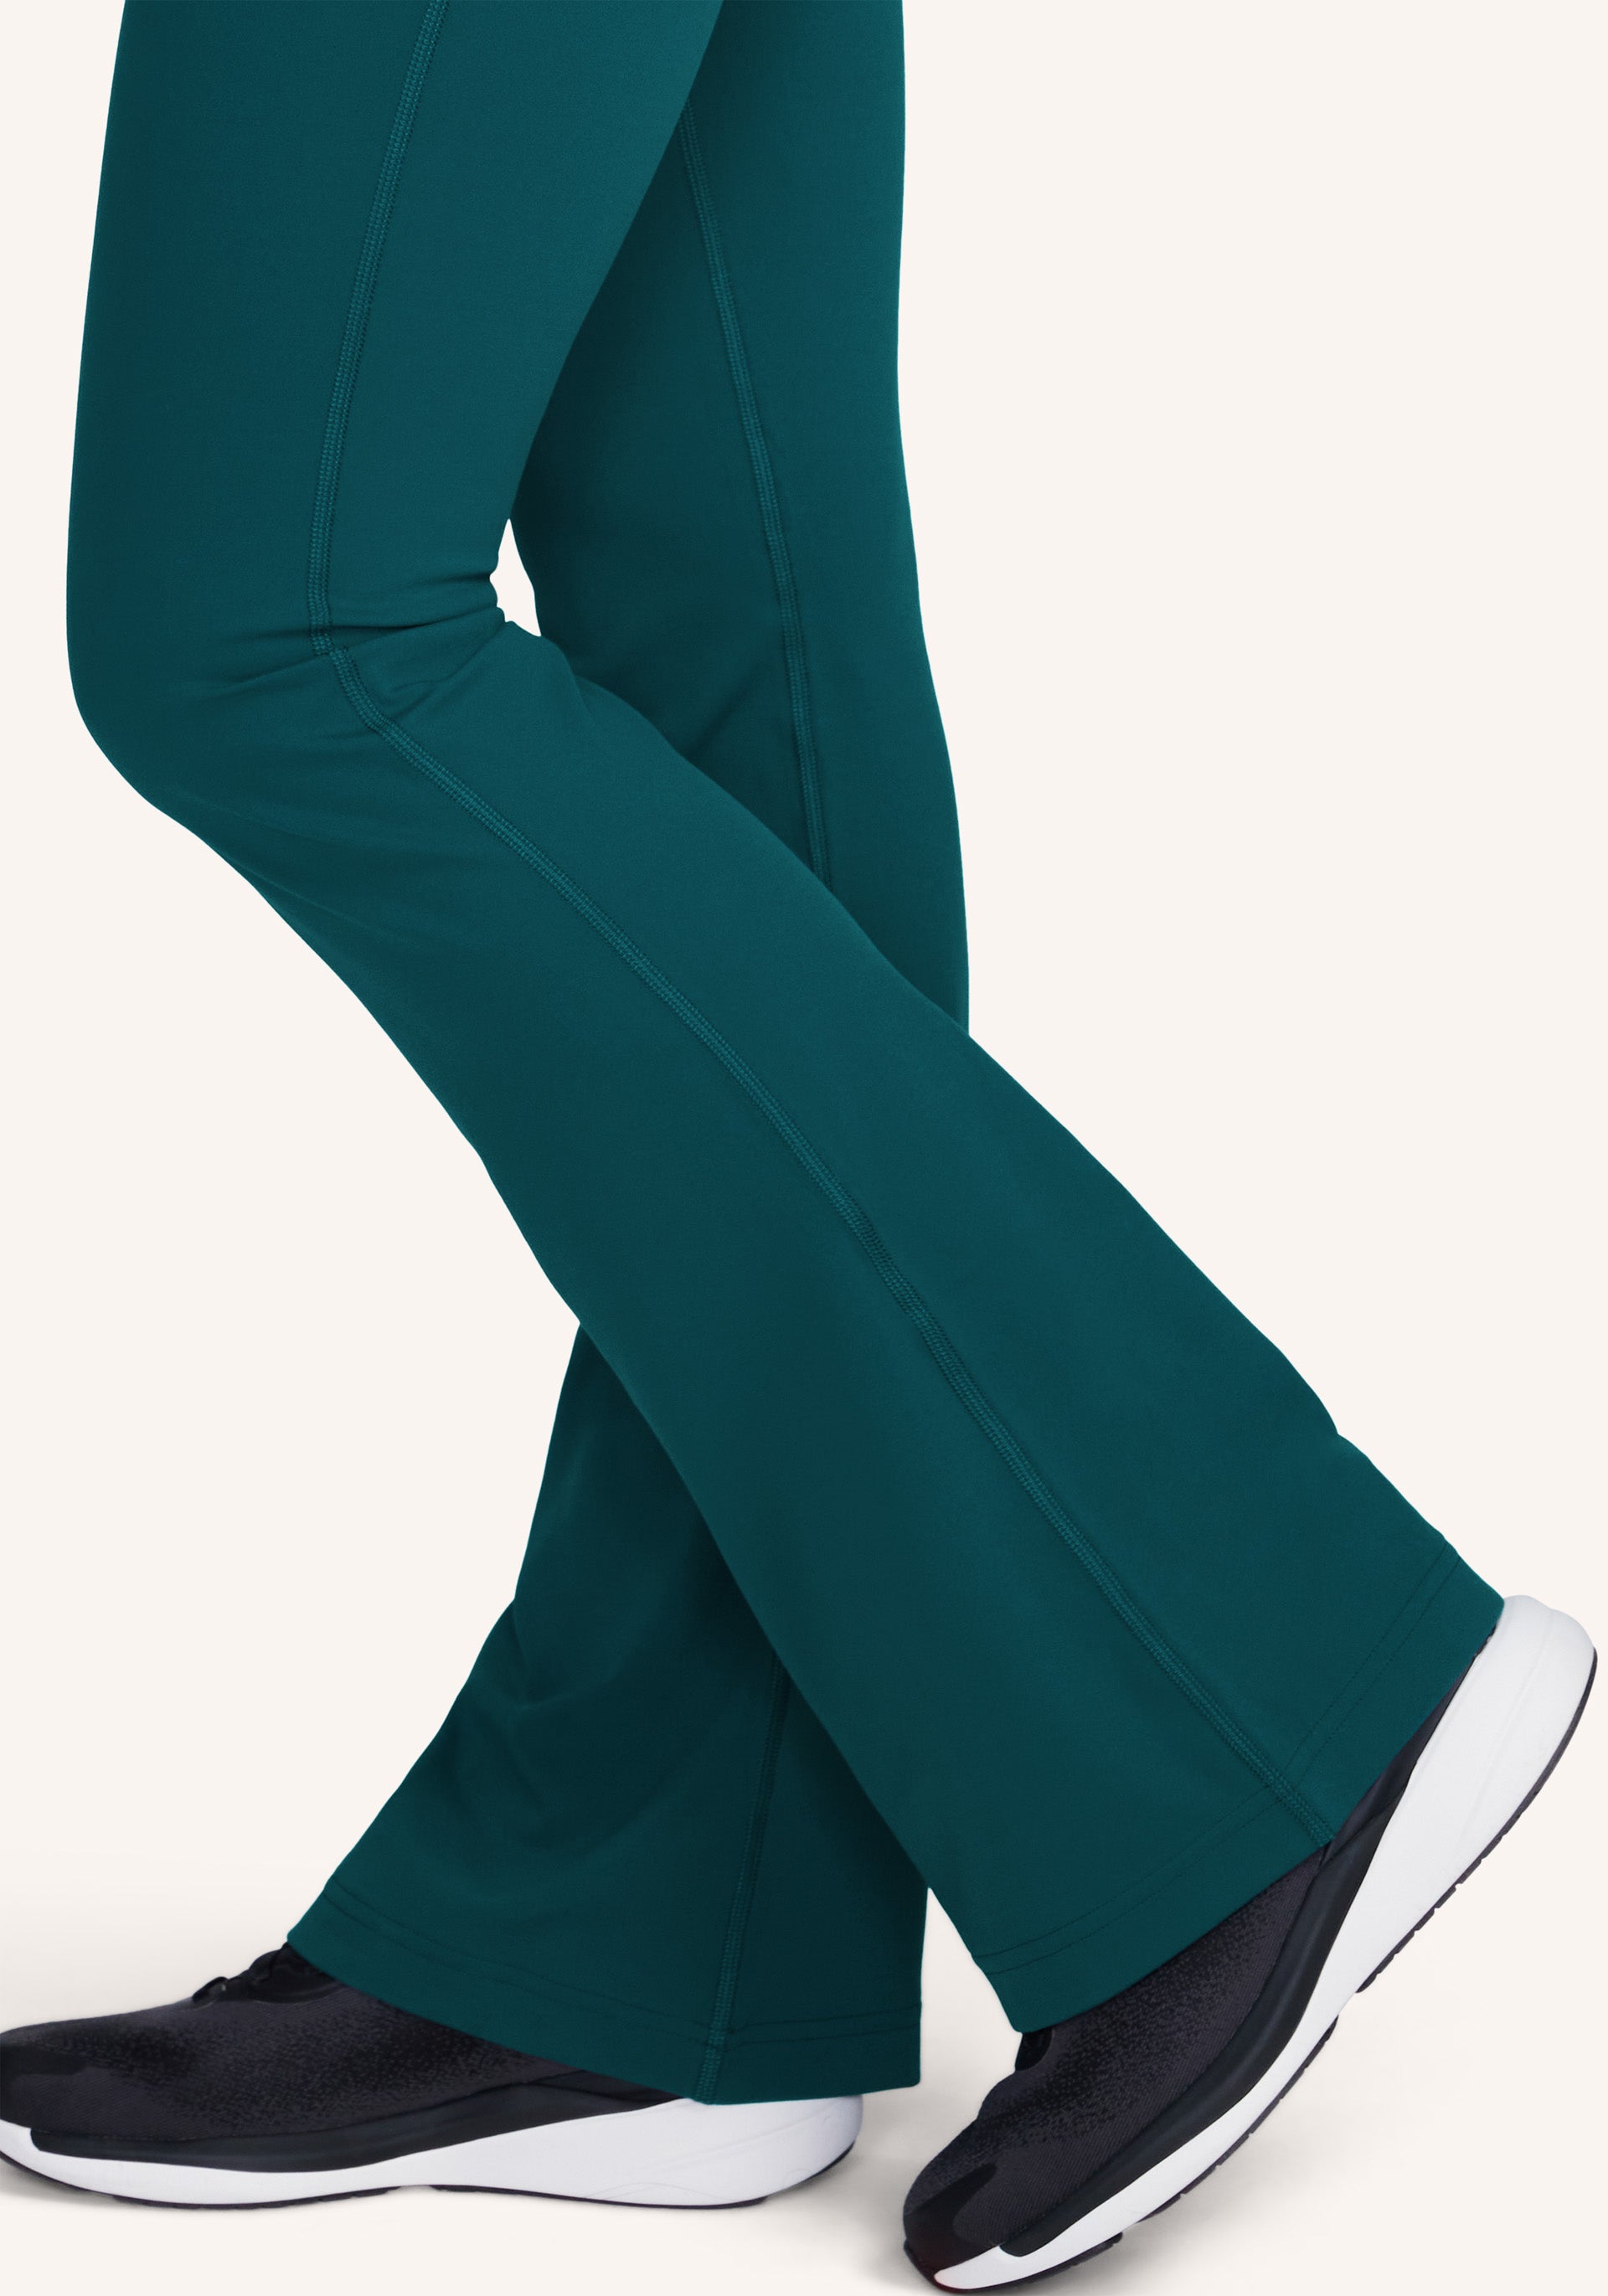 High Waist Womens Green Flare Yoga Pants With Groove Flares For Running,  Street Fitness, And Yoga Tight Belly, Nine Minute Length Style 307R From  Yq5664, $25.76